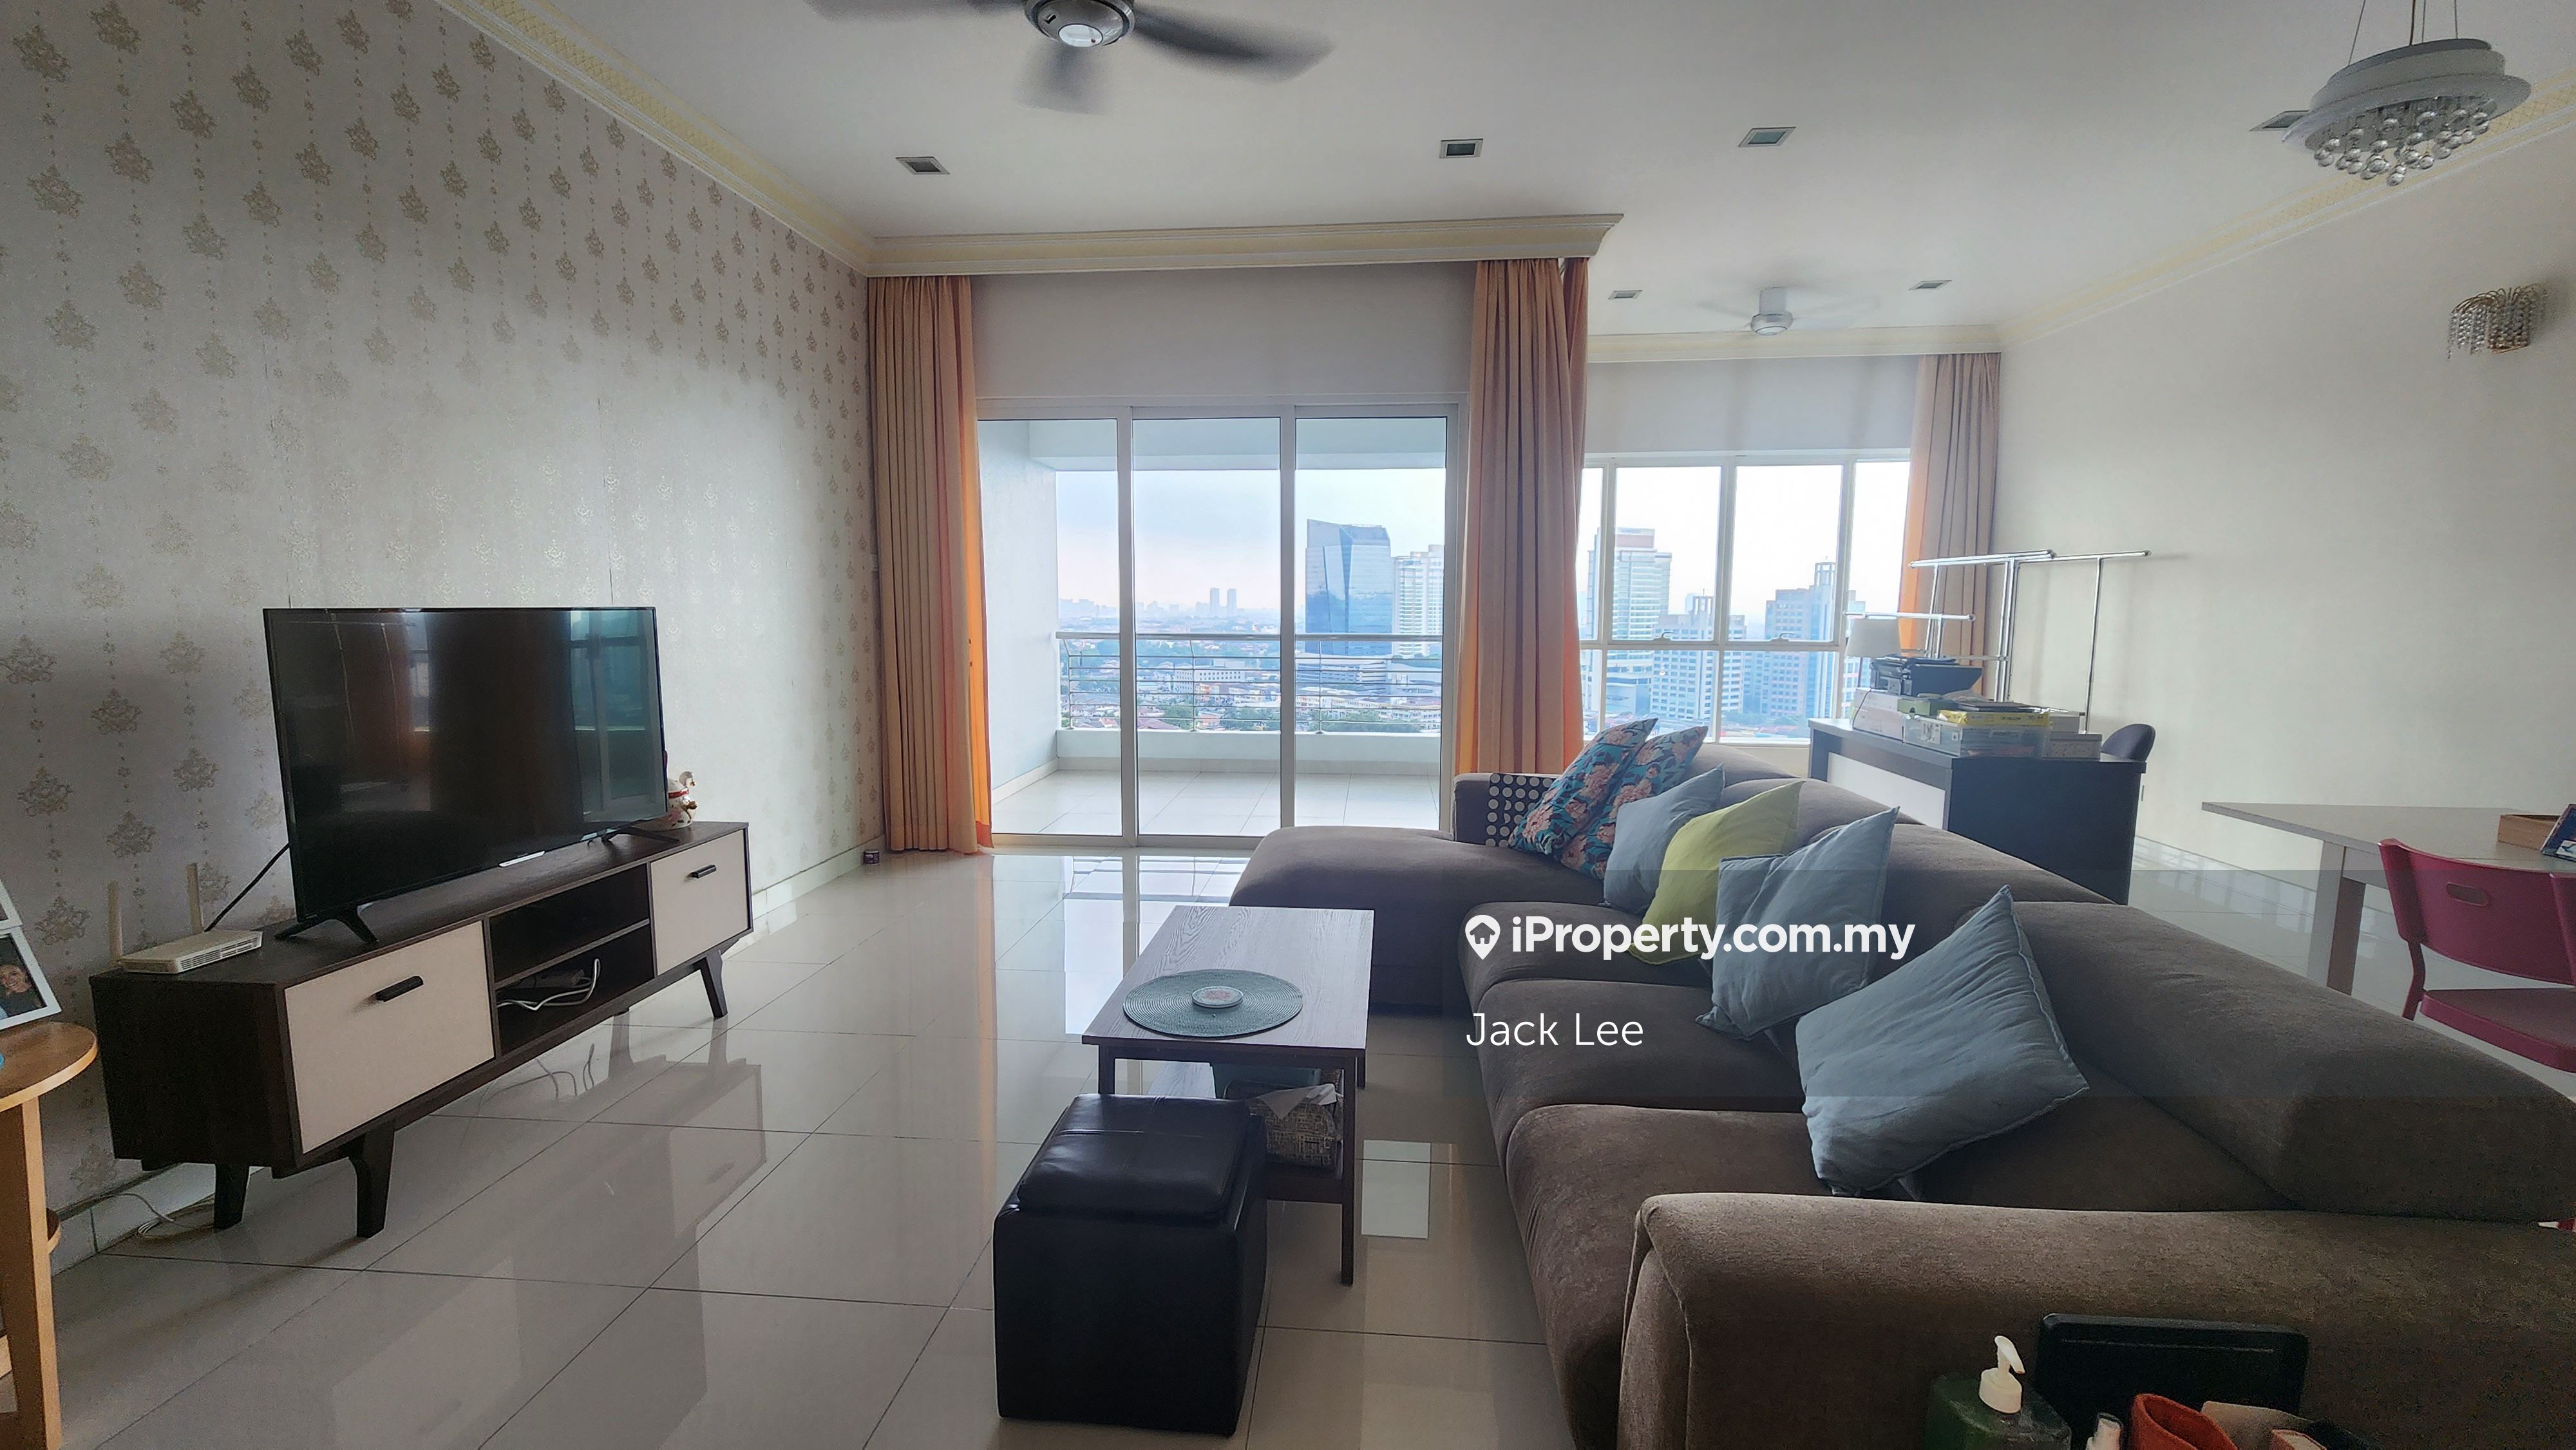 Nice view with good condition spacious living area